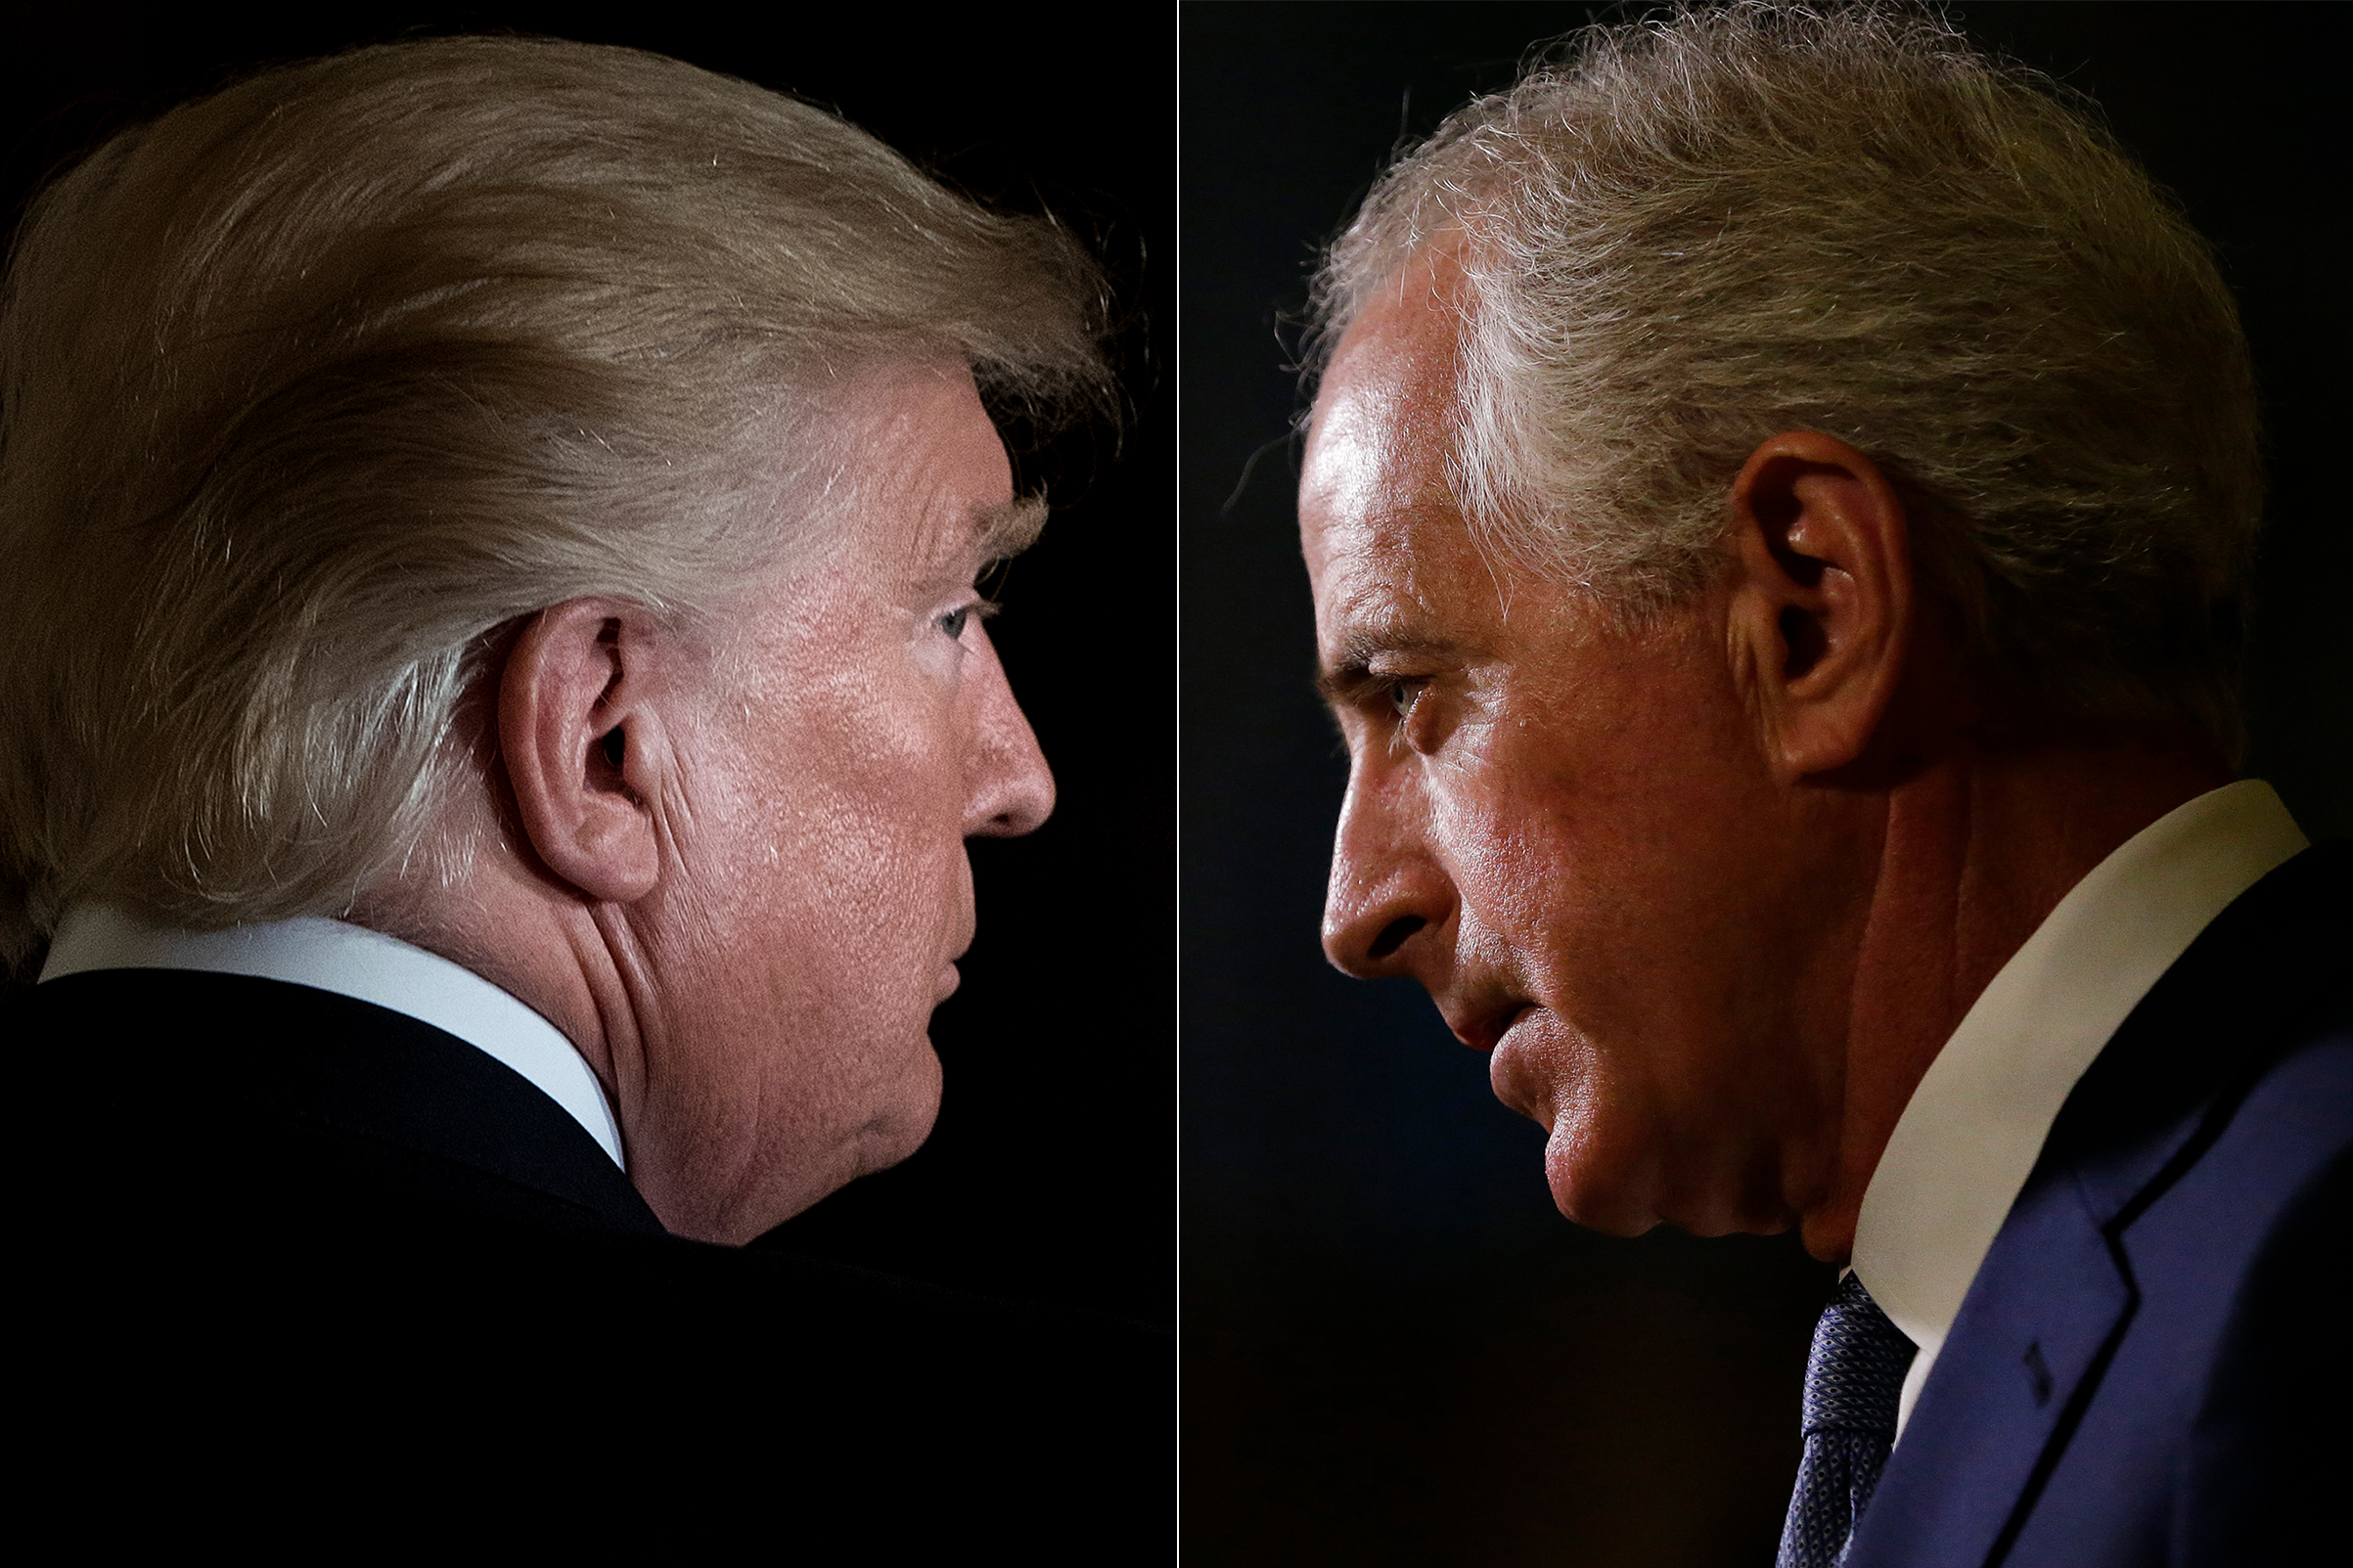 President Donald Trump leaves after a Hispanic Heritage Month event in the East Room of the White House October 6, 2017 in Washington, DC.
                      ; Senator Bob Corker, a Republican from Tennessee, speaks to the media in the lobby at Trump Tower in New York, U.S., on Tuesday, Nov. 29, 2016 in New York City. (John Angelillo—Bloomberg/Getty Images; Brendan Smialowski—AFP/Getty Images)